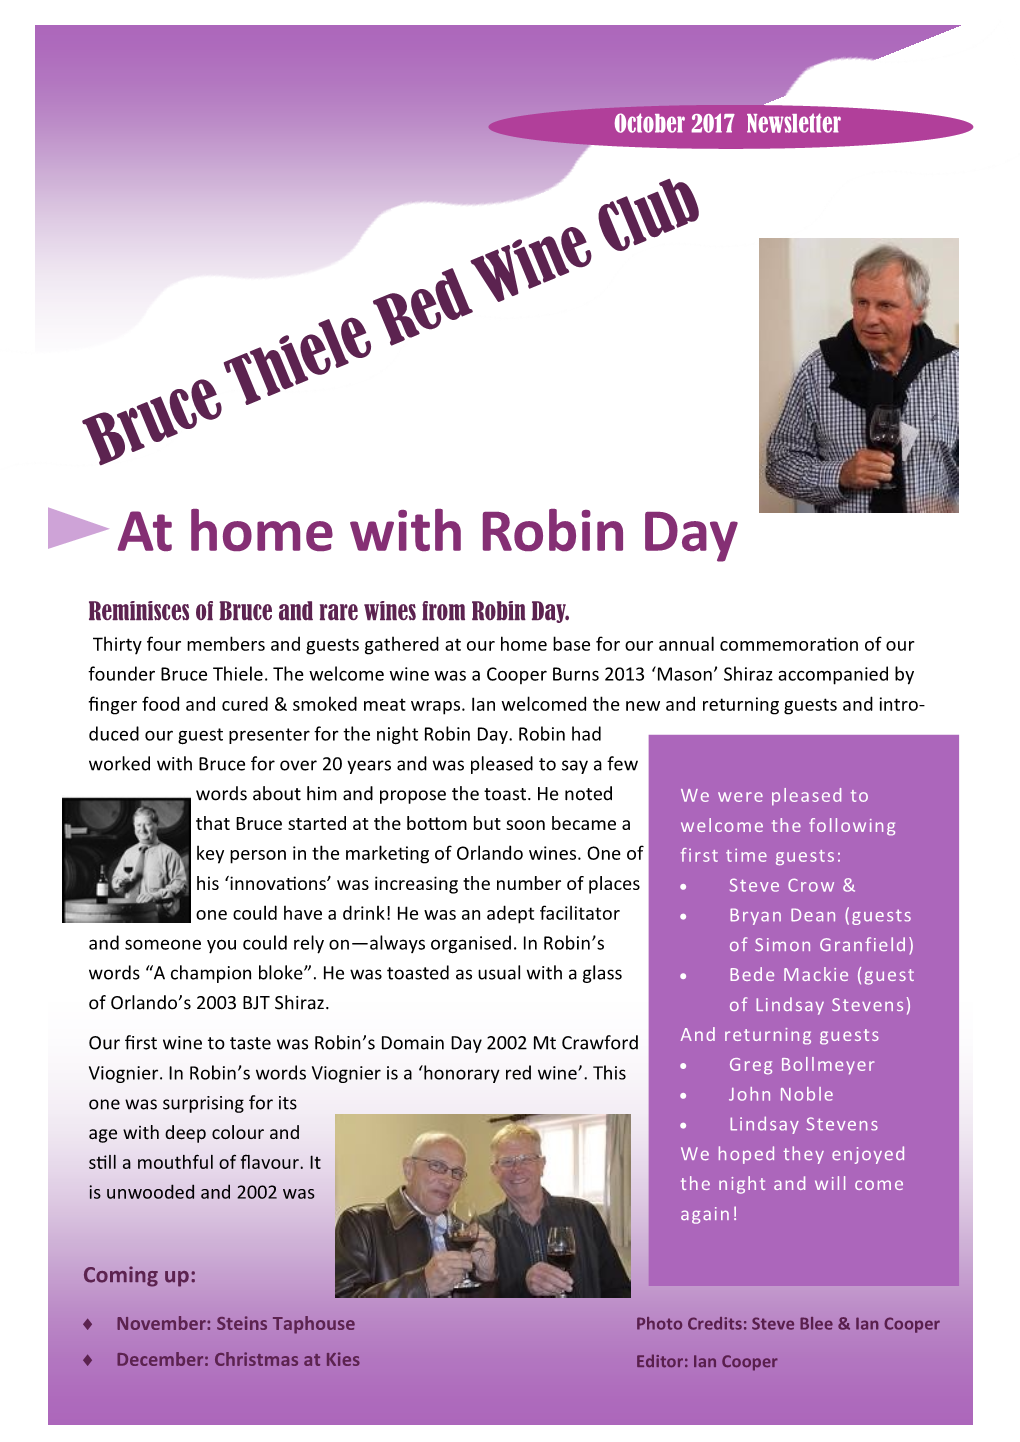 At Home with Robin Day